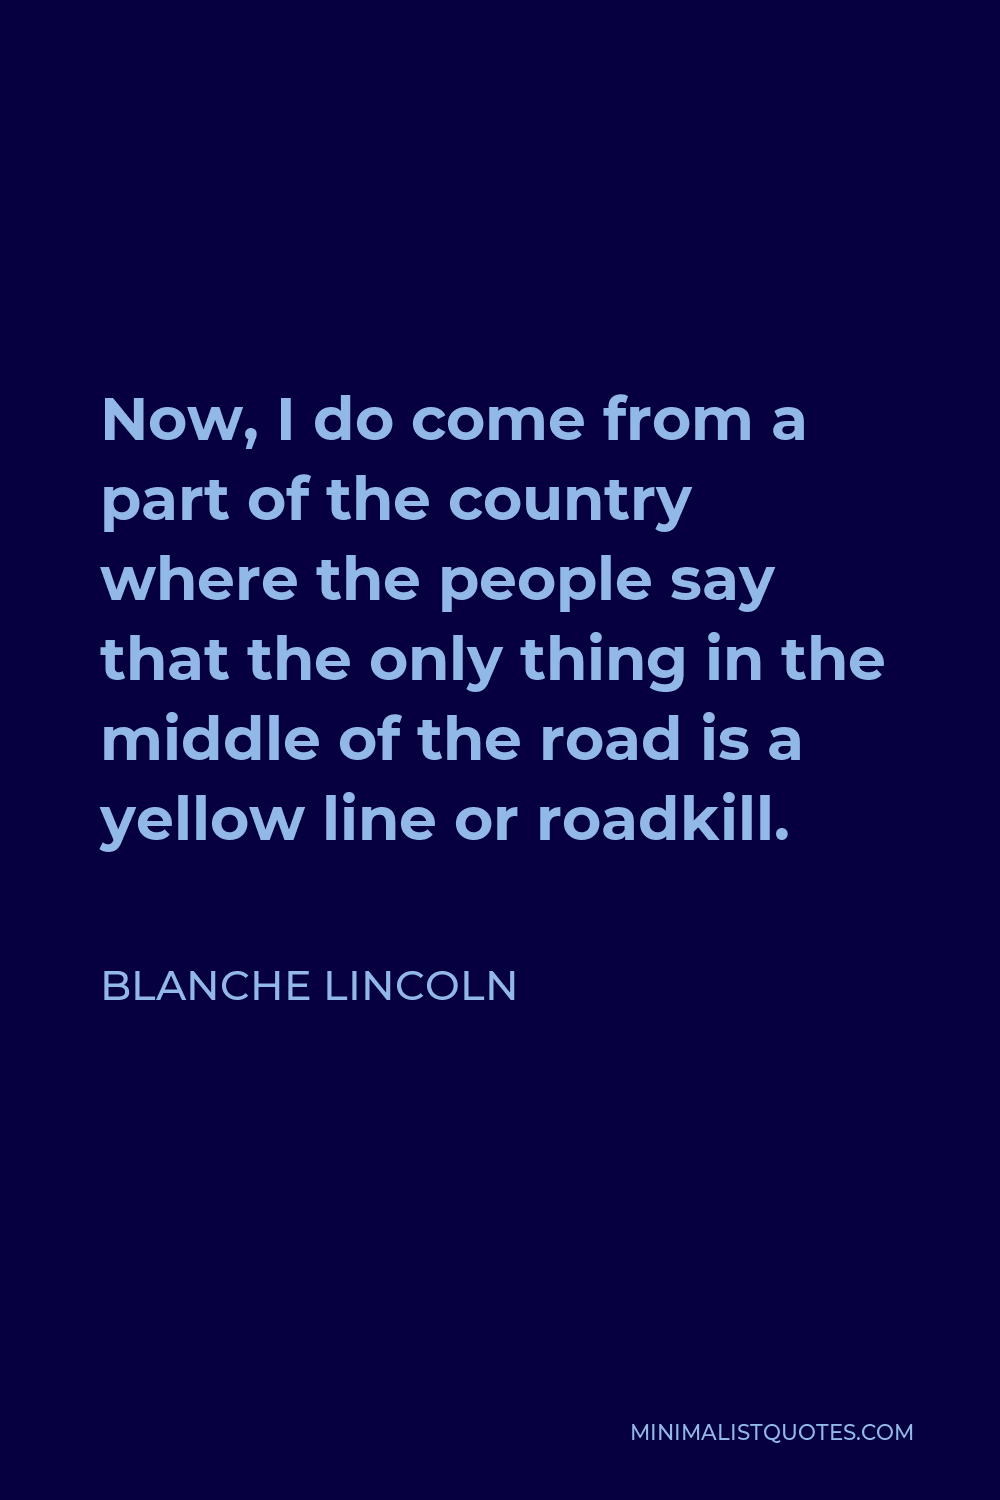 Blanche Lincoln Quote - Now, I do come from a part of the country where the people say that the only thing in the middle of the road is a yellow line or roadkill.